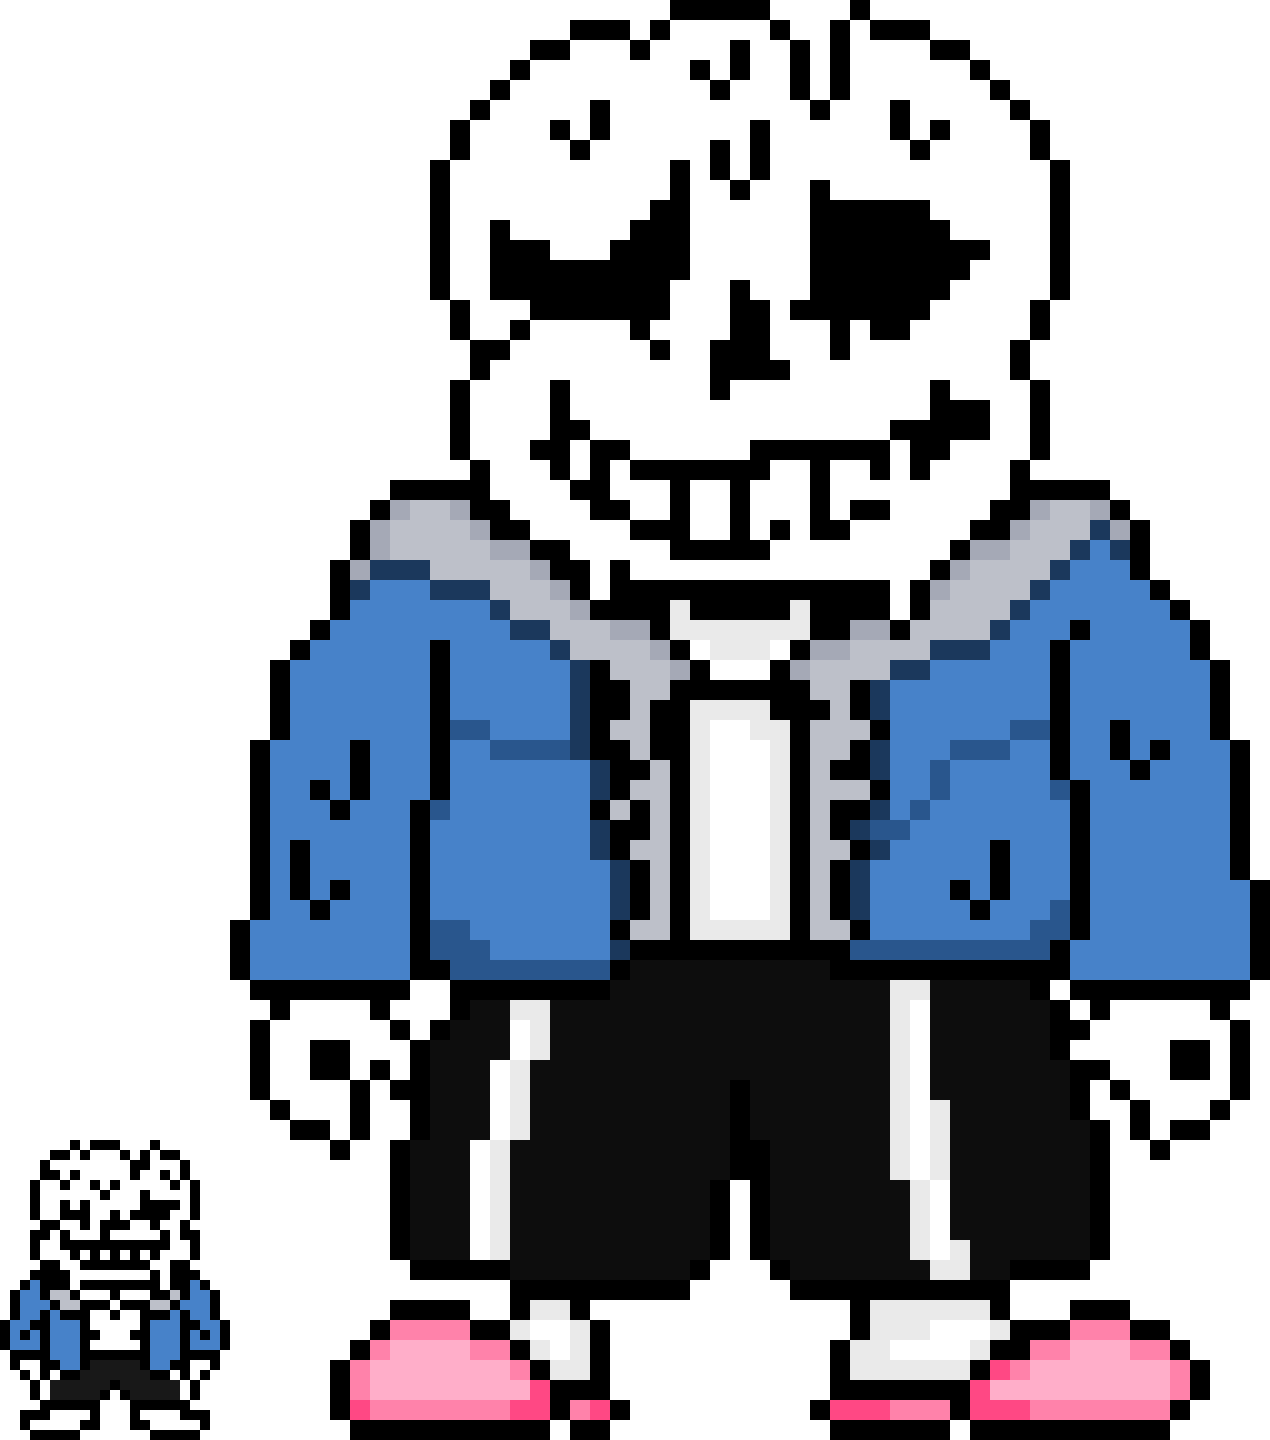 SixBones but is only Sans by Niko189 on DeviantArt